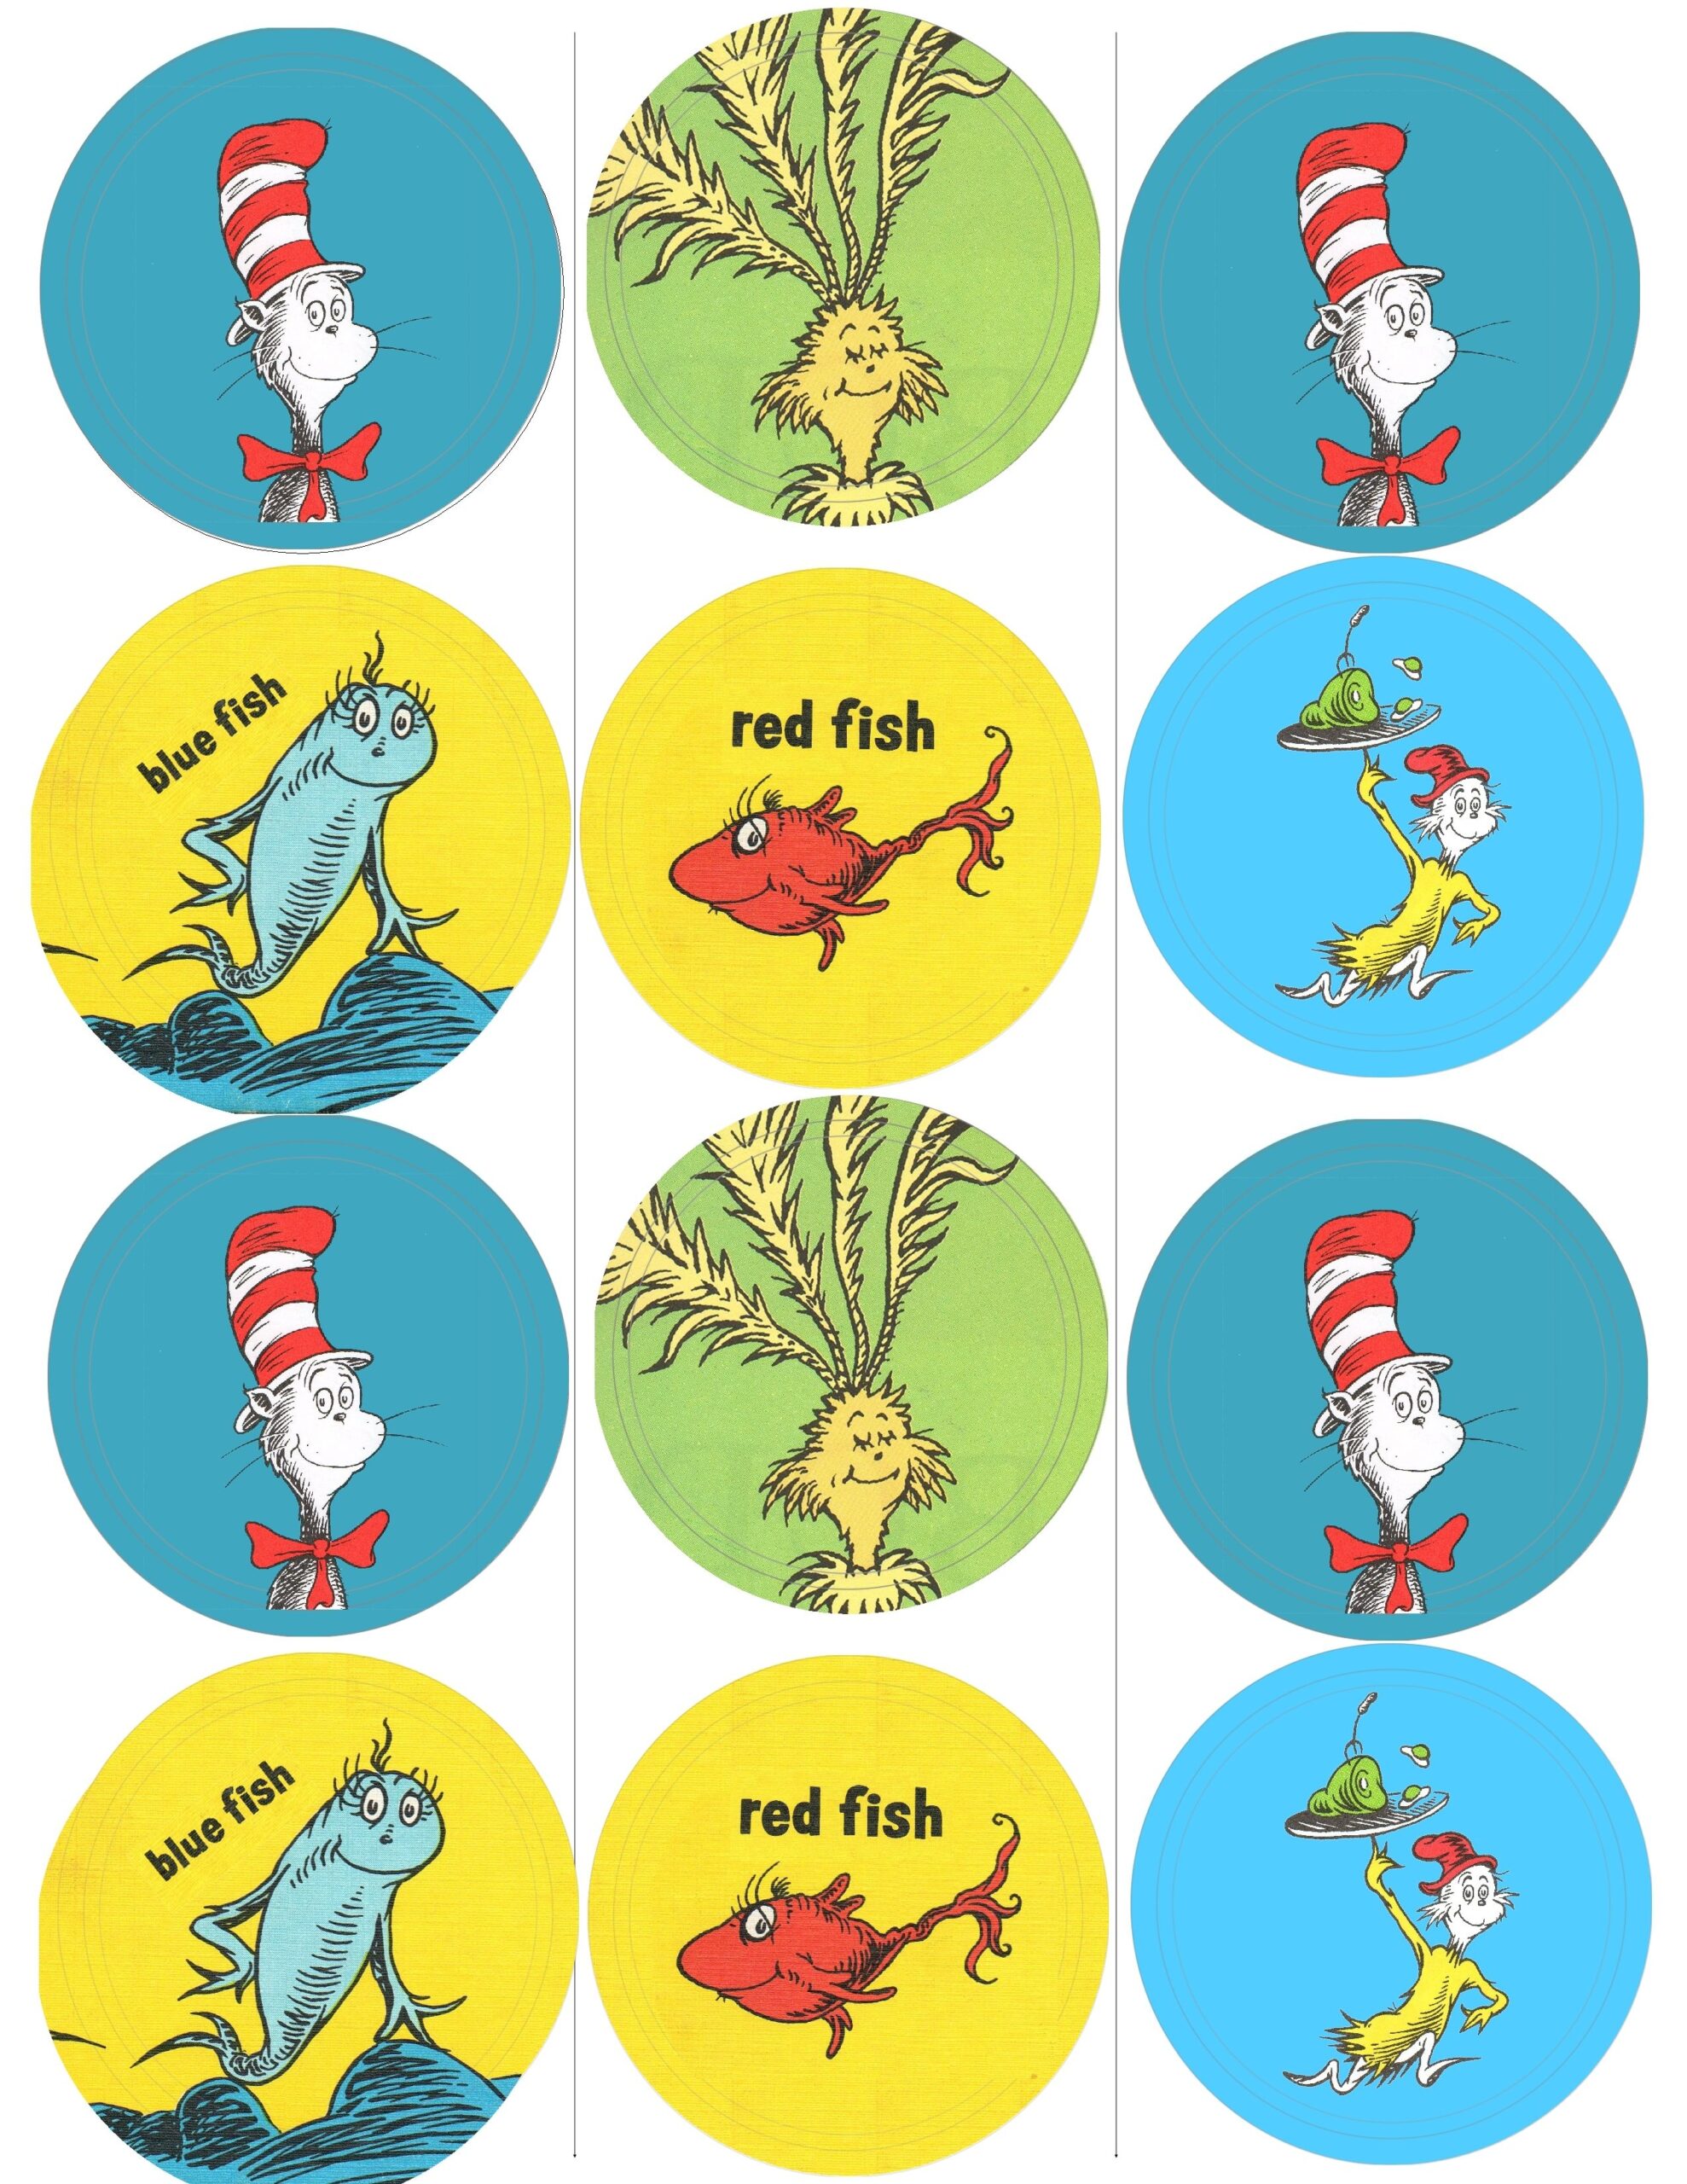 Can Be Used As A Template For Bottle Covers Or As The Covers Themselves I Used Dr Seuss Scrapbook Dr Seuss Dr Seuss Cupcake Toppers Dr Seuss Birthday Party